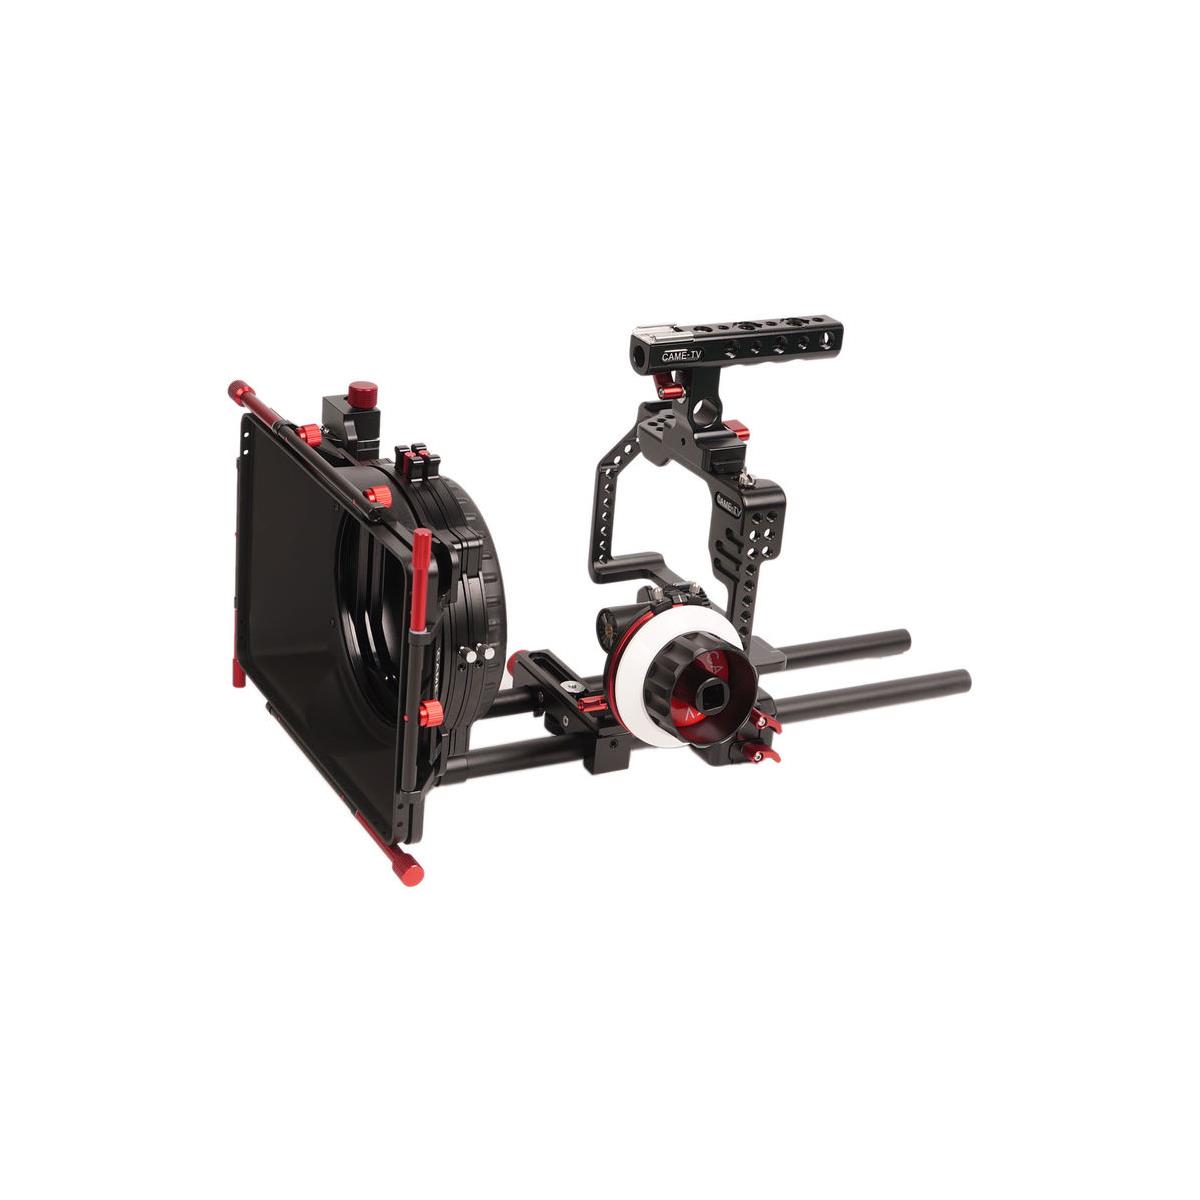 Image of Came-TV Protective Cage with Mattebox and Follow Focus for Panasonic GH5 Camera